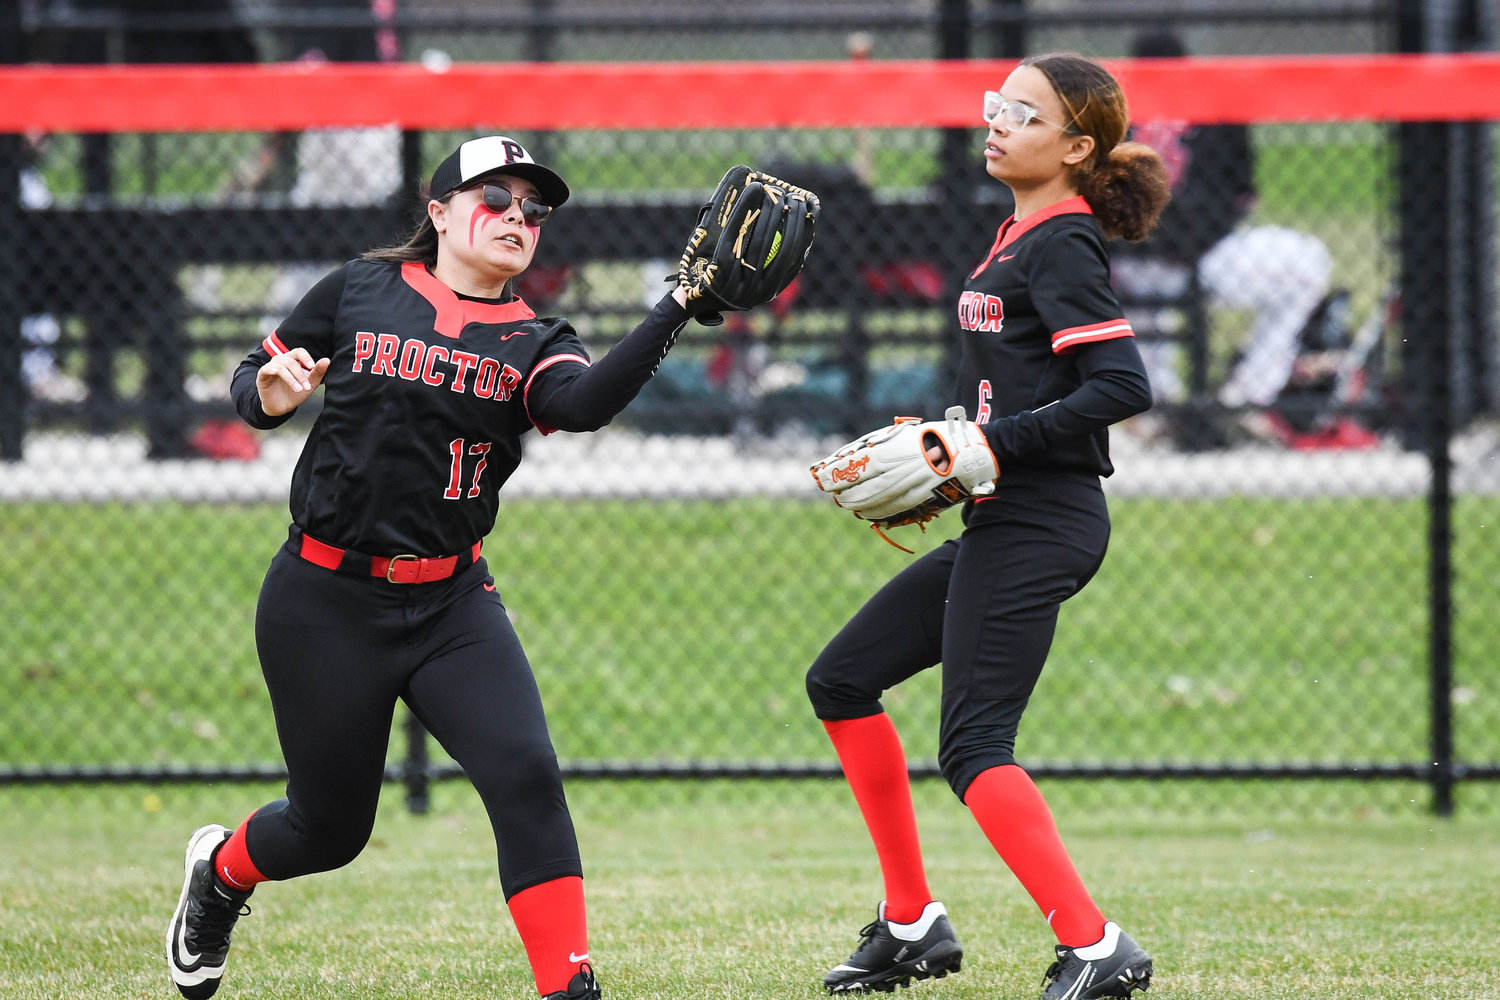 Utica Proctor outfielder Brianna Schneider, left, makes a catch during the game against Vernon-Verona-Sherrill on Friday in Utica. The Raiders lost 4-3. At right is outfielder Elicia Barefoot.